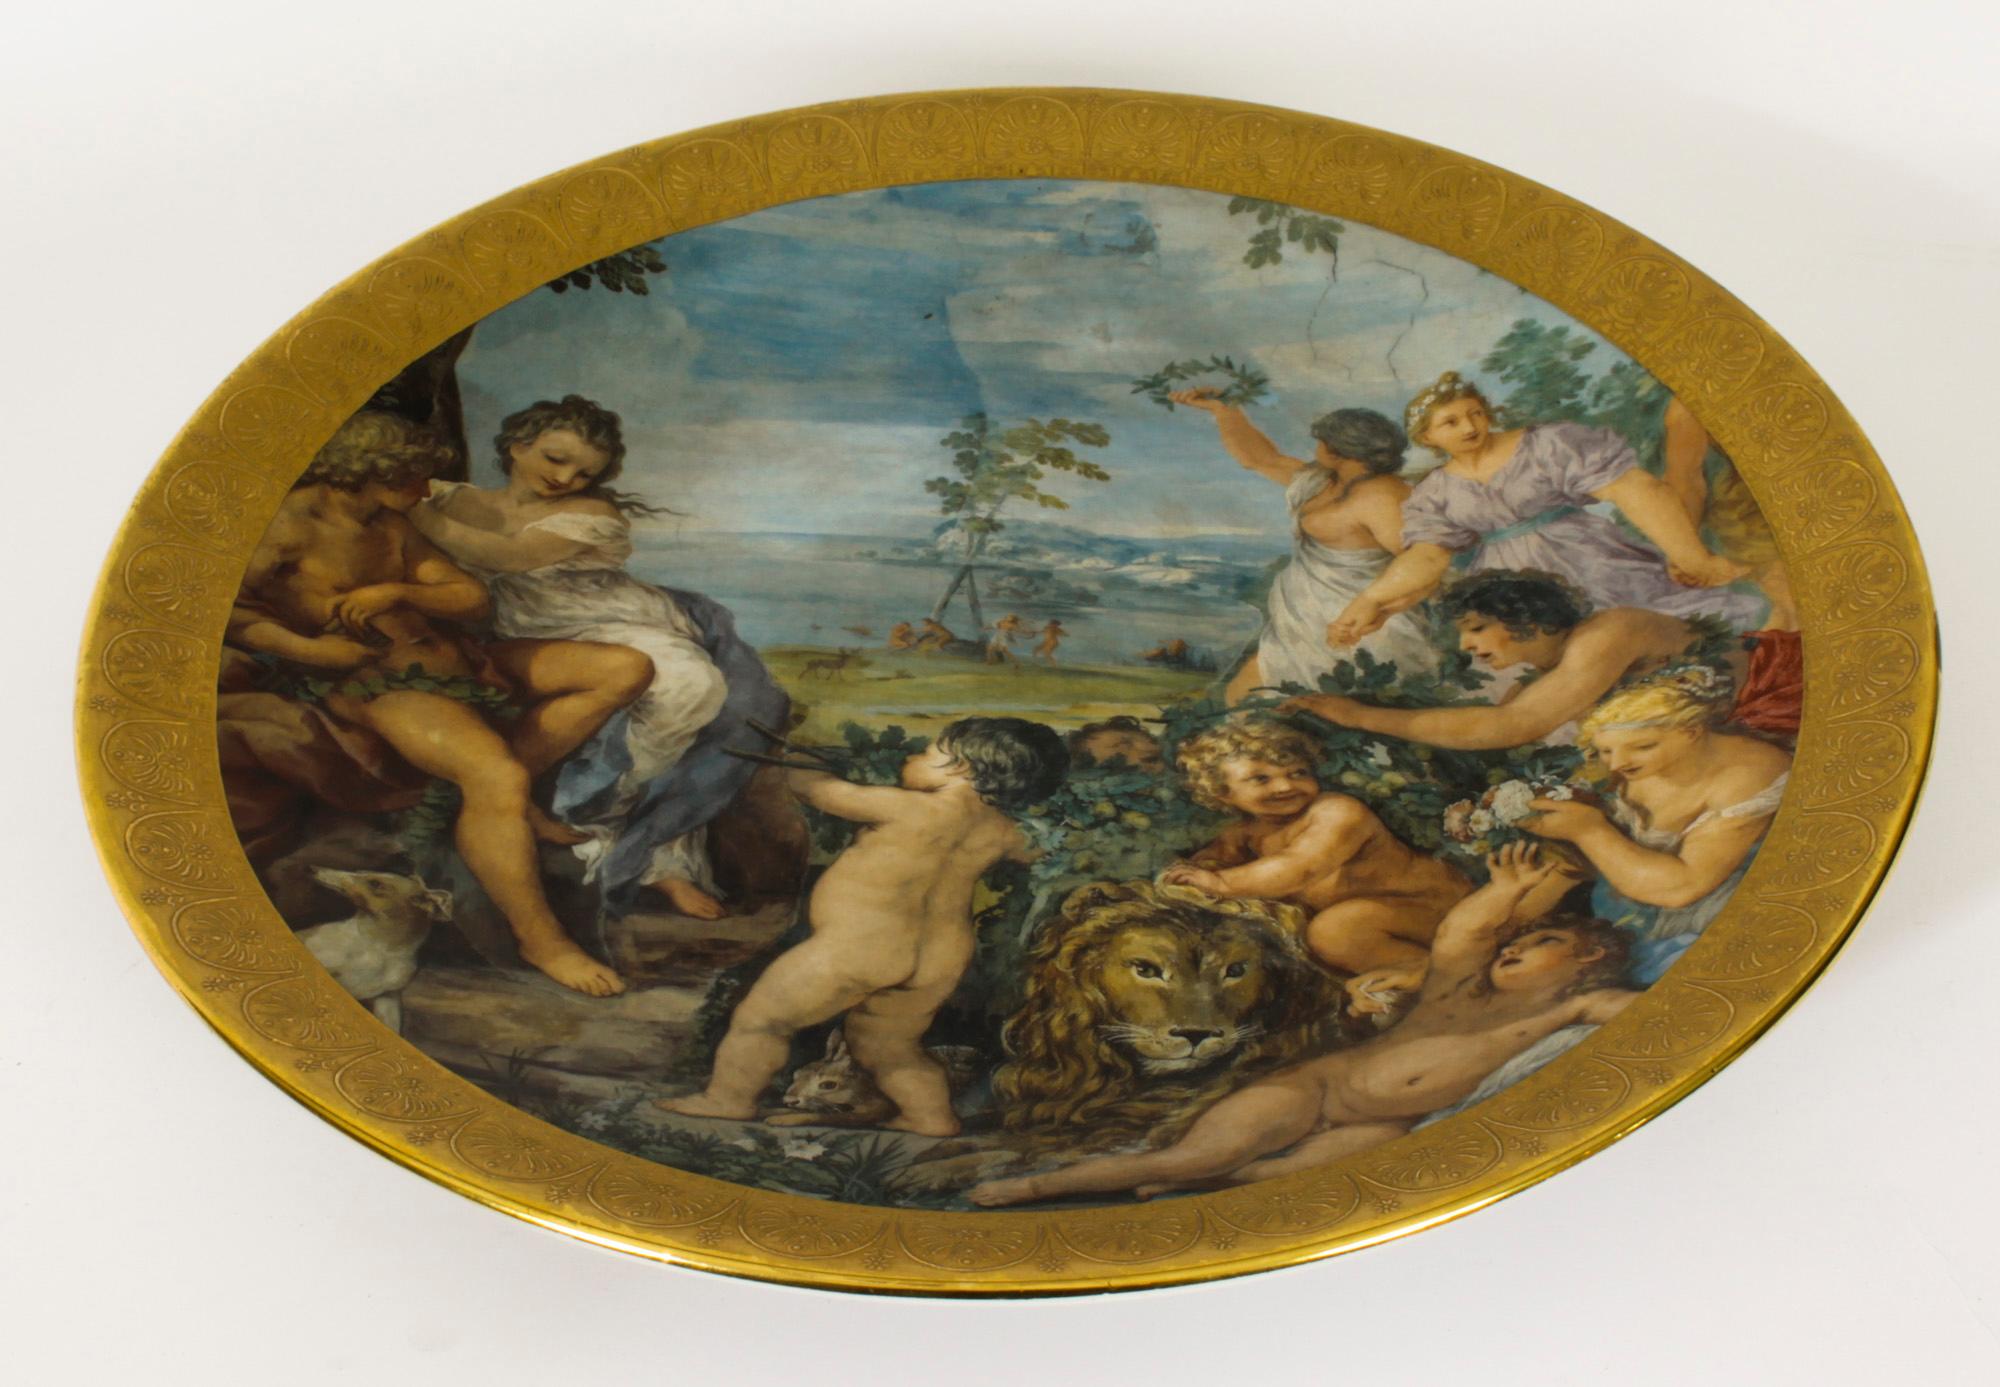 This is a beautiful huge vintage Italian porcelain charger, Circa 1950 in date.

This colourful and decorative scene depicts a group of maidens and care free cherubs with a lion set within a gilded embossed border.

The charger rests upon a